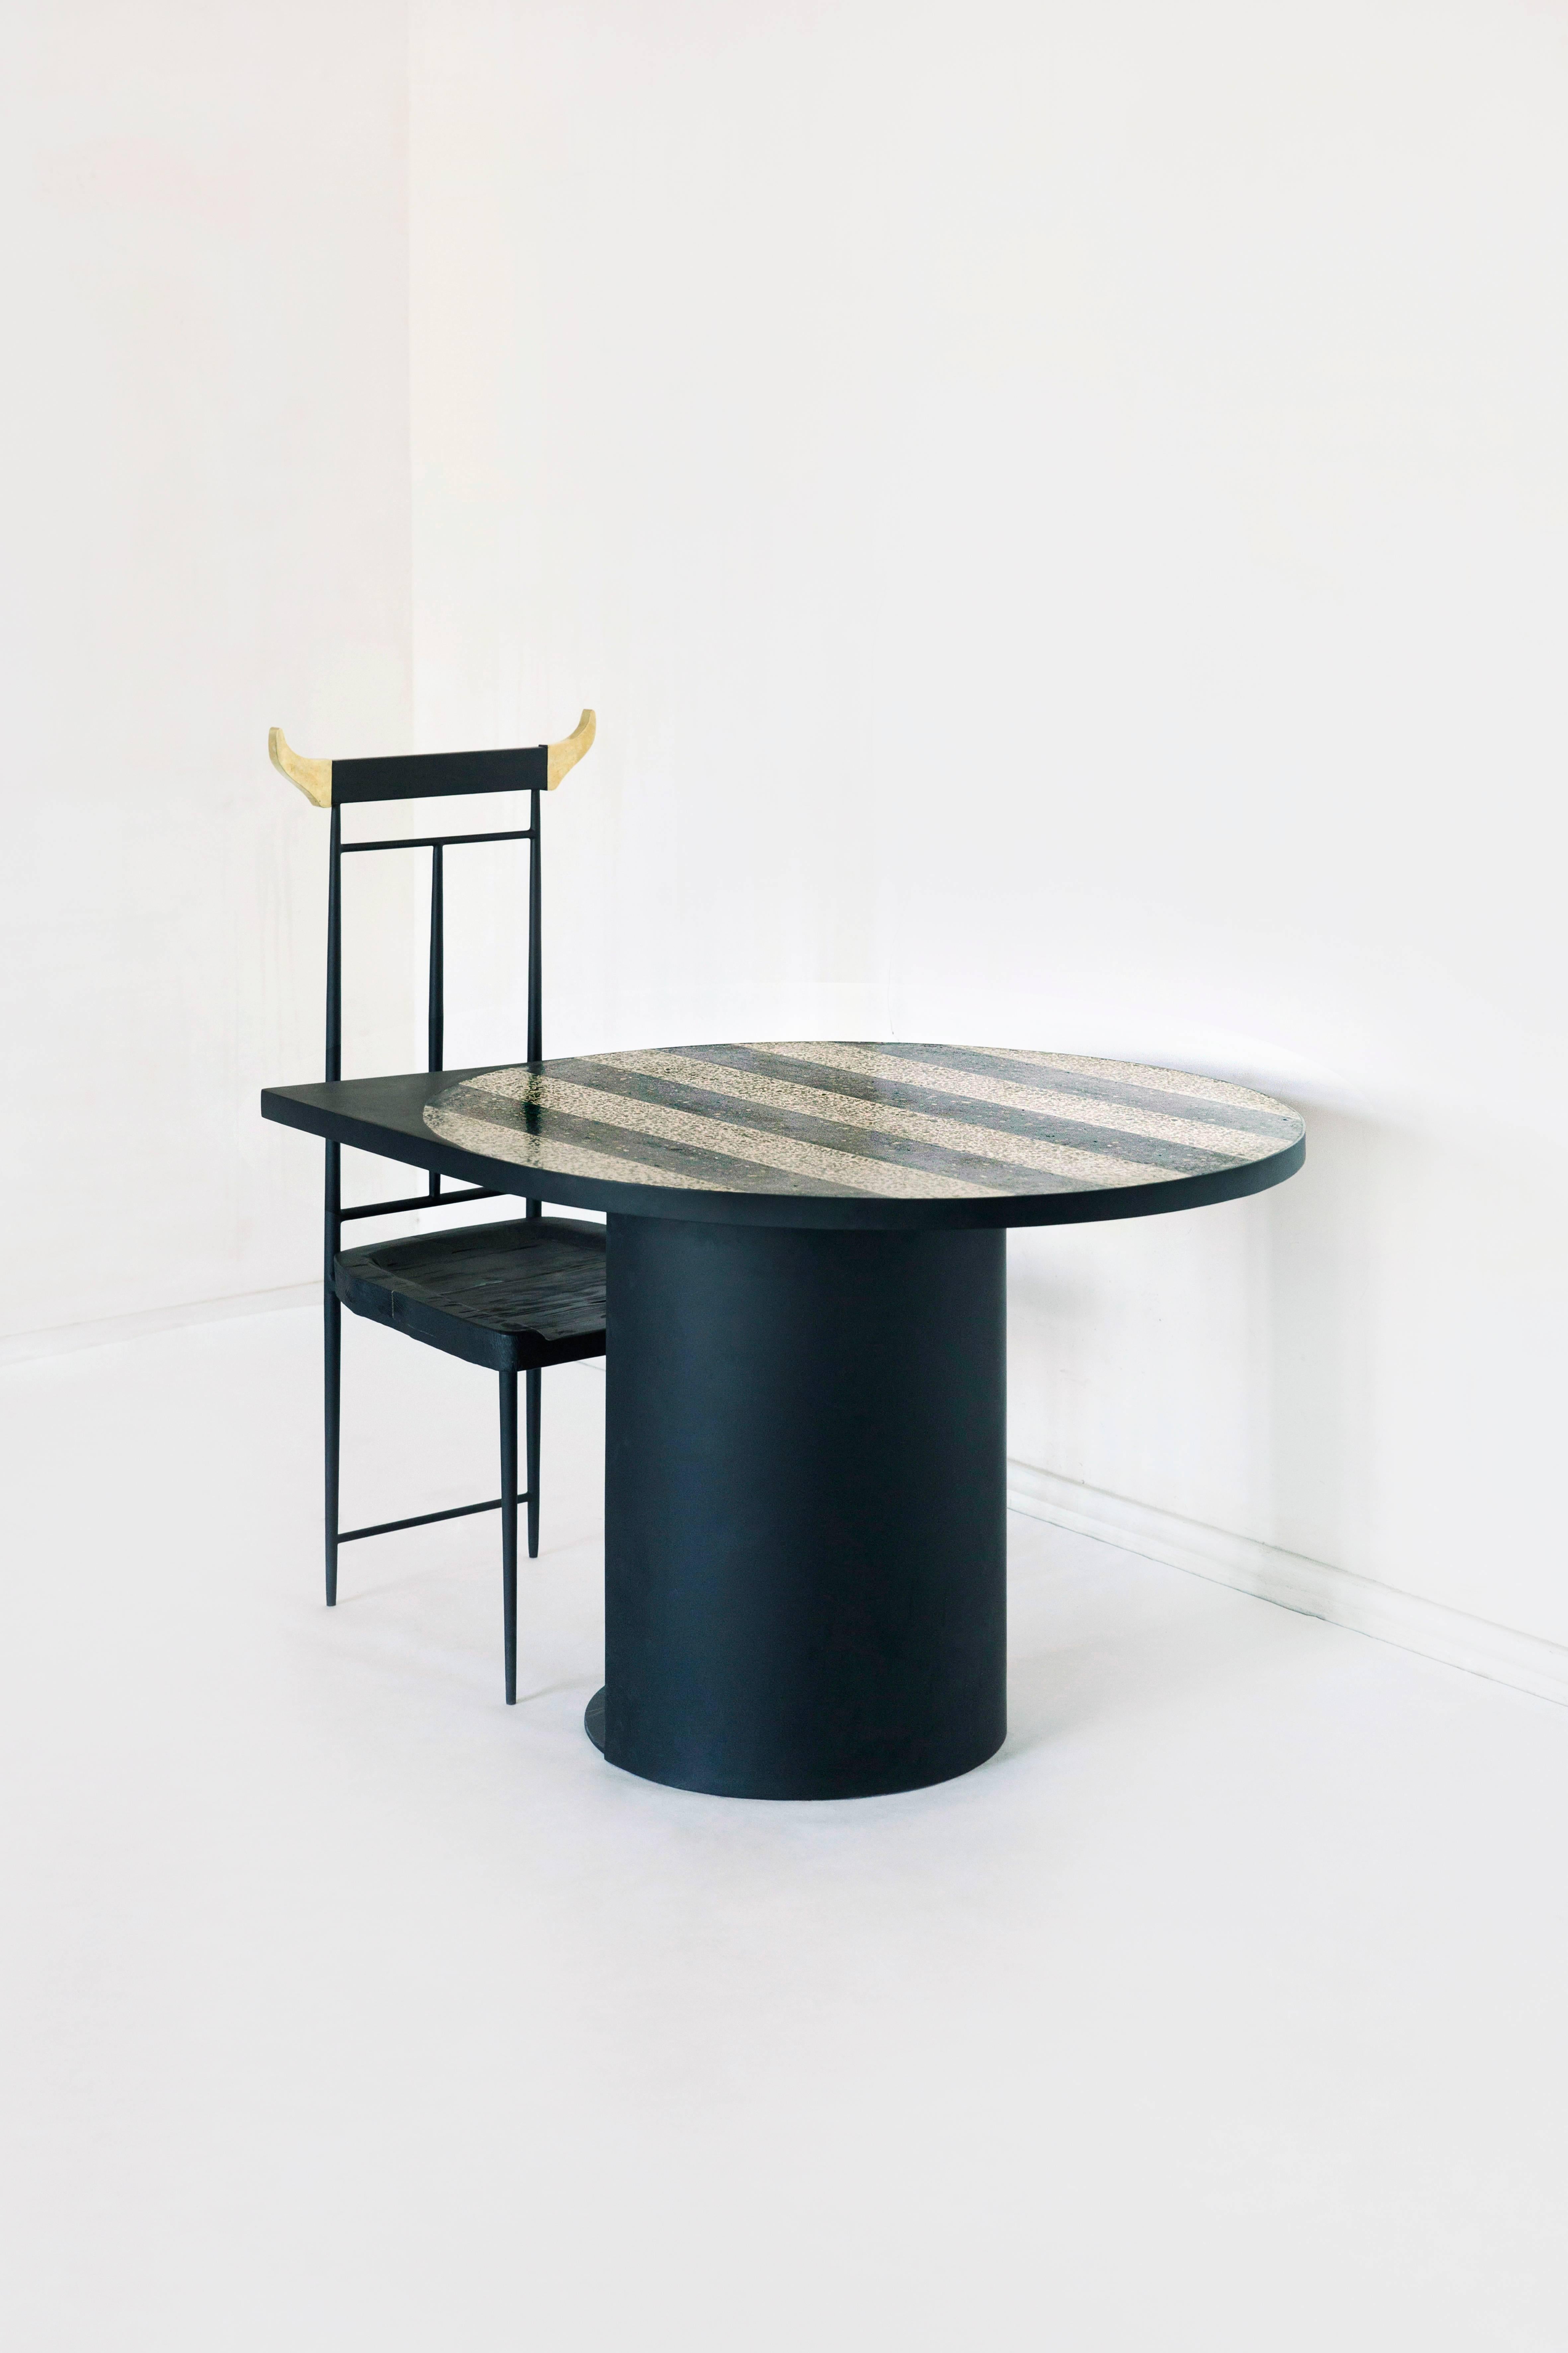 Mosaic Geometric brass table, rooms
Dimensions: L100/W100/H75
Materials: Brass/Mosaic/steel.

Stripy table
Inspired by the concept of “keeping magic in our life by staying free yet stable” this Terrazzo Stripy Dining Table, features elegant